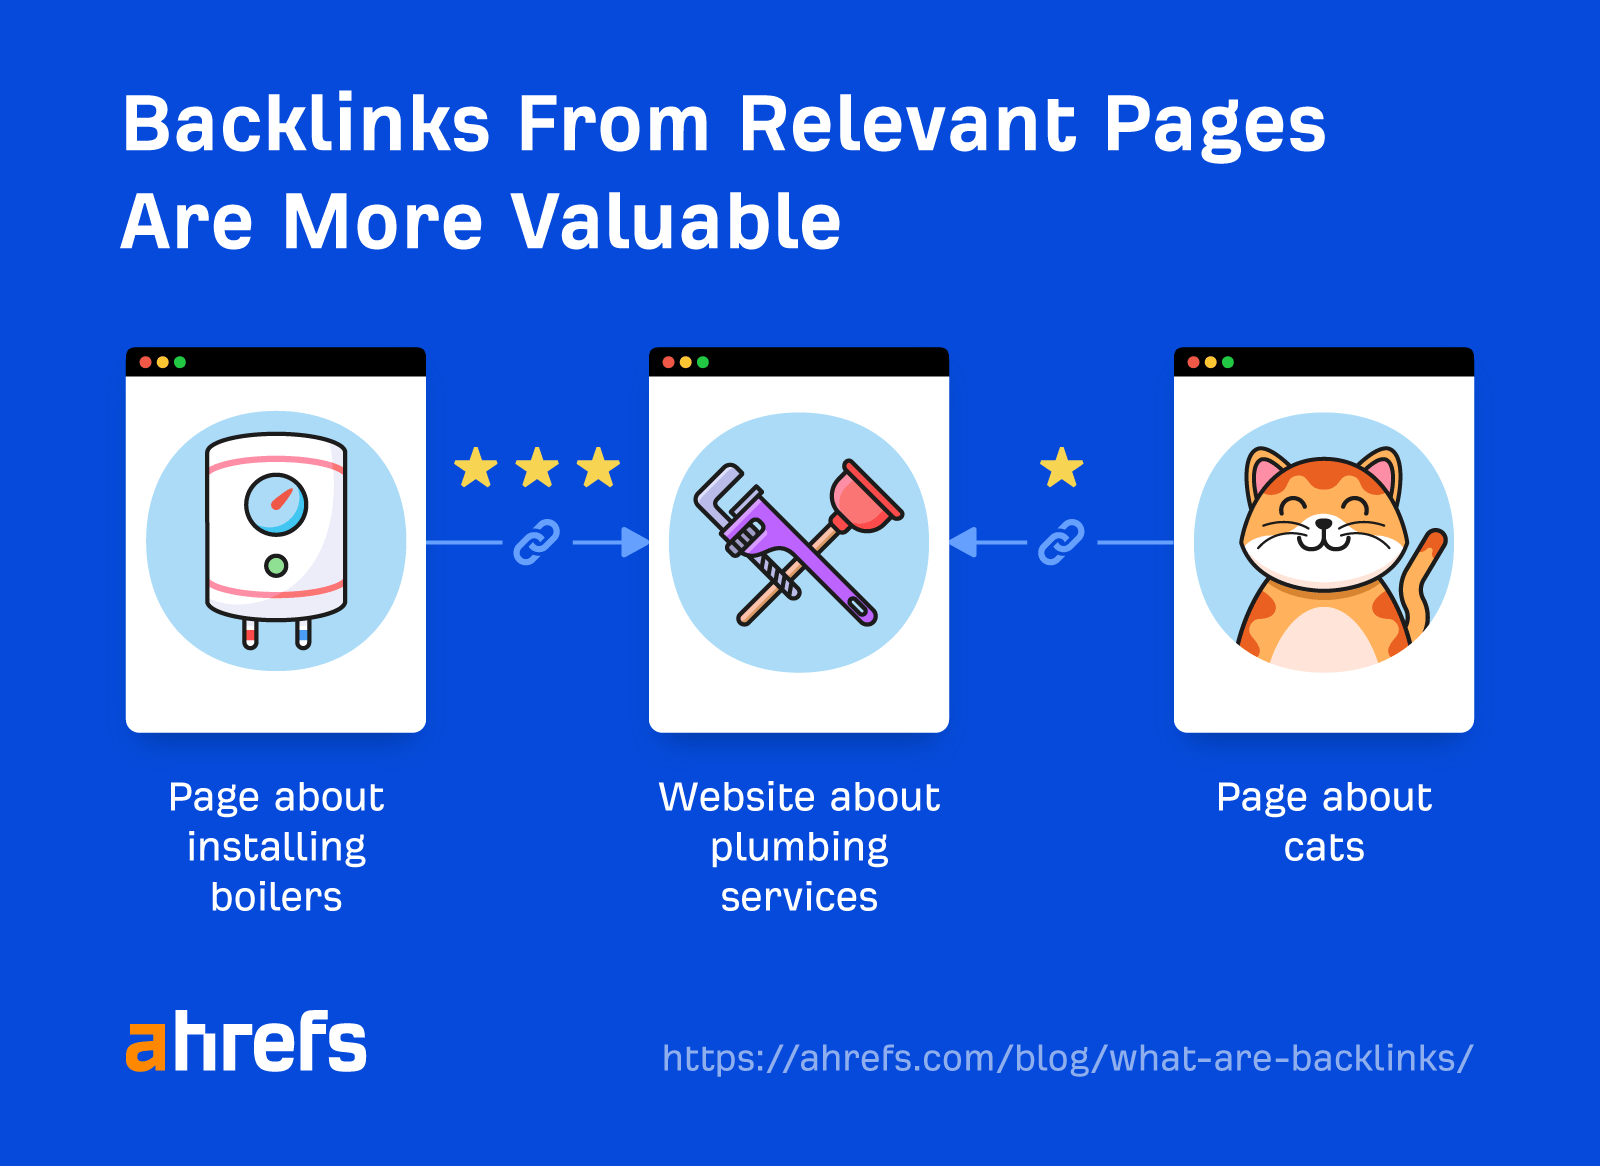 Backlinks from relevant pages are more valuable